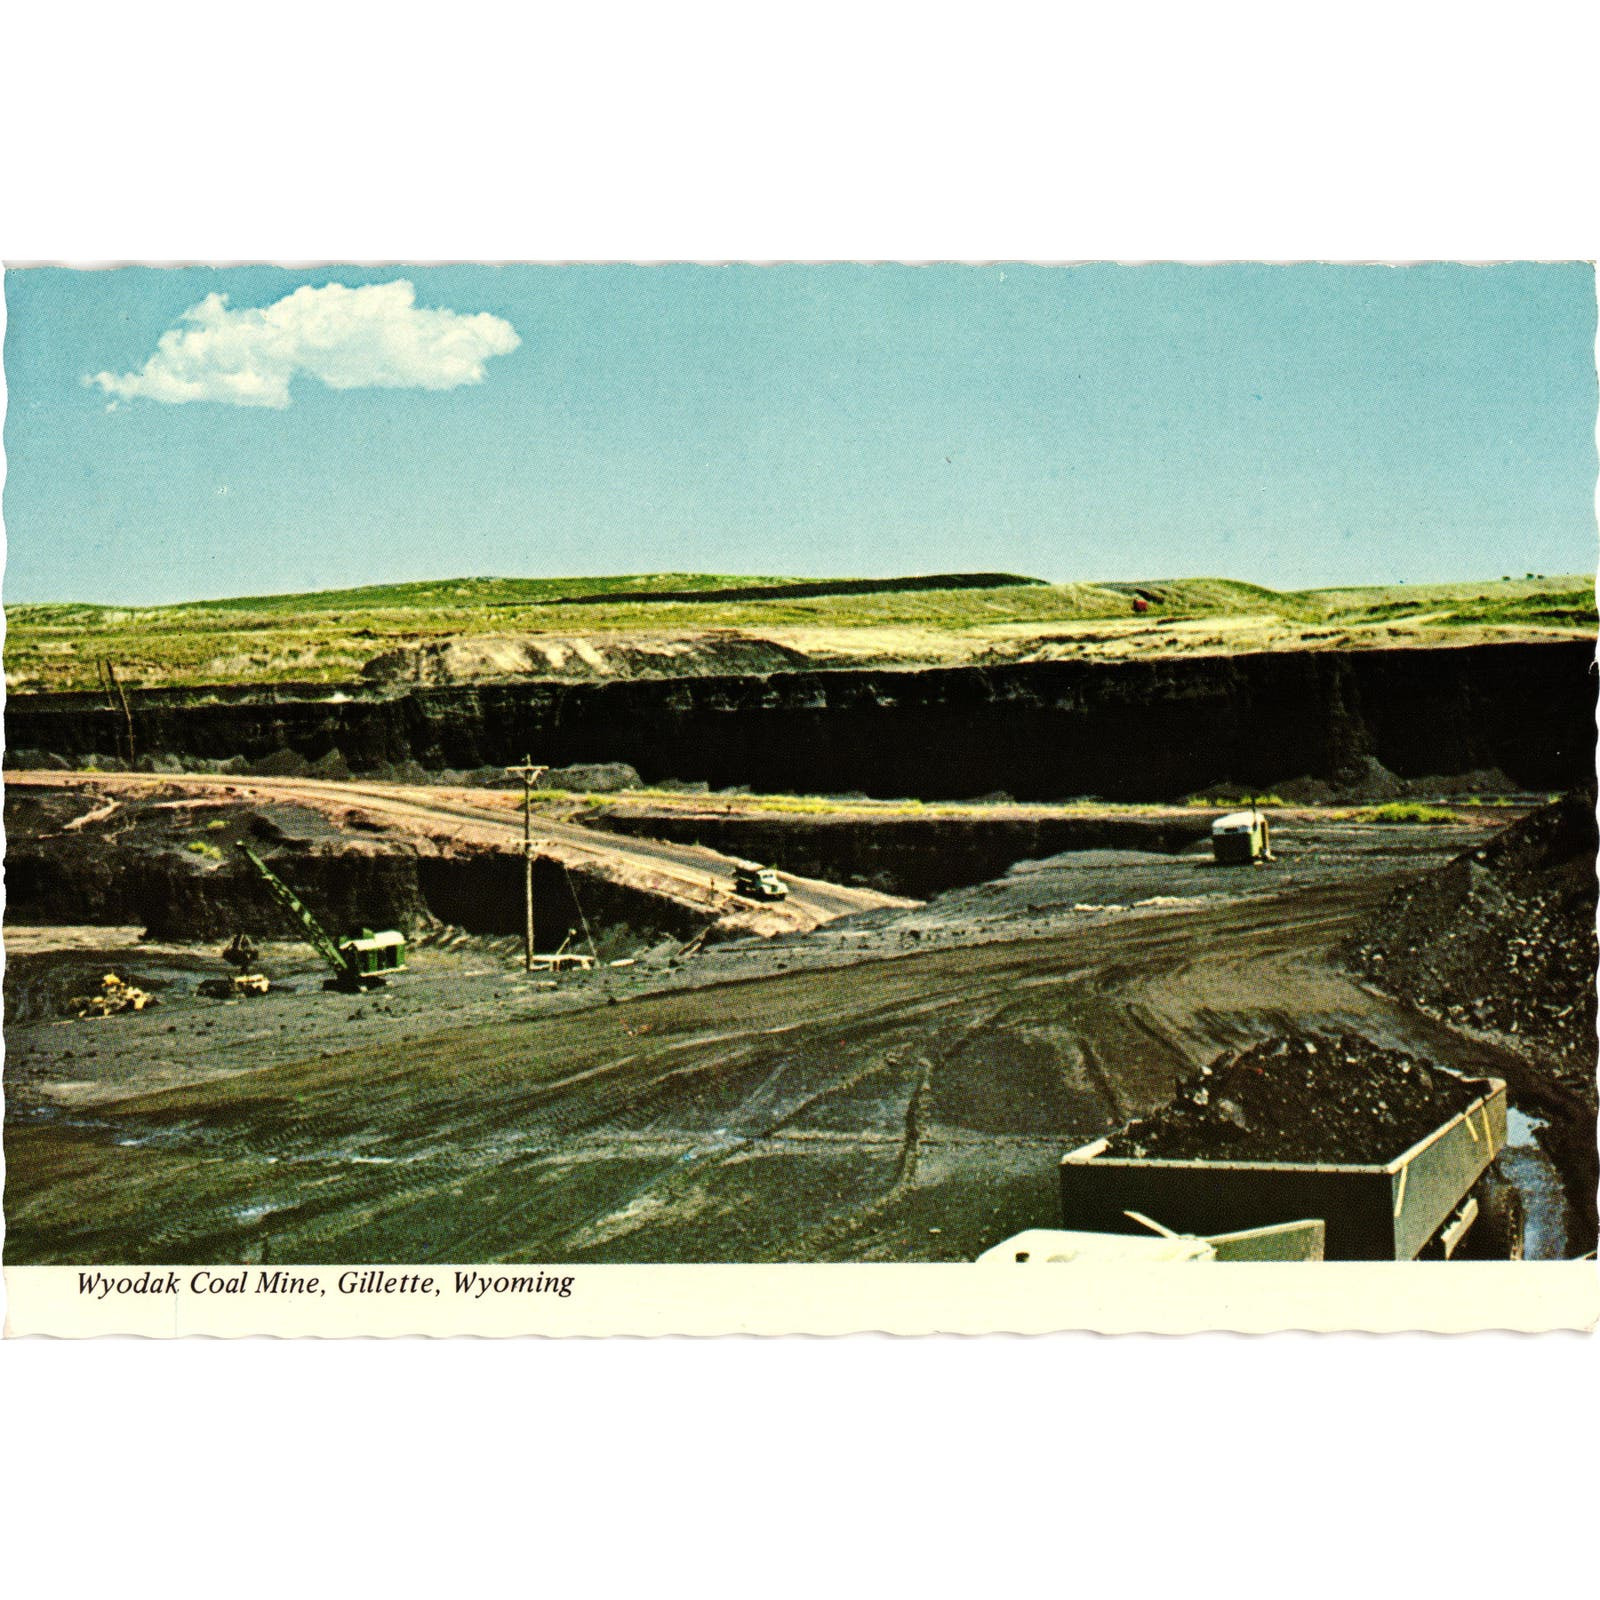 Wonderful Wyoming Wyodak Coal Mine Gillette Cambell County Postcard Unposted